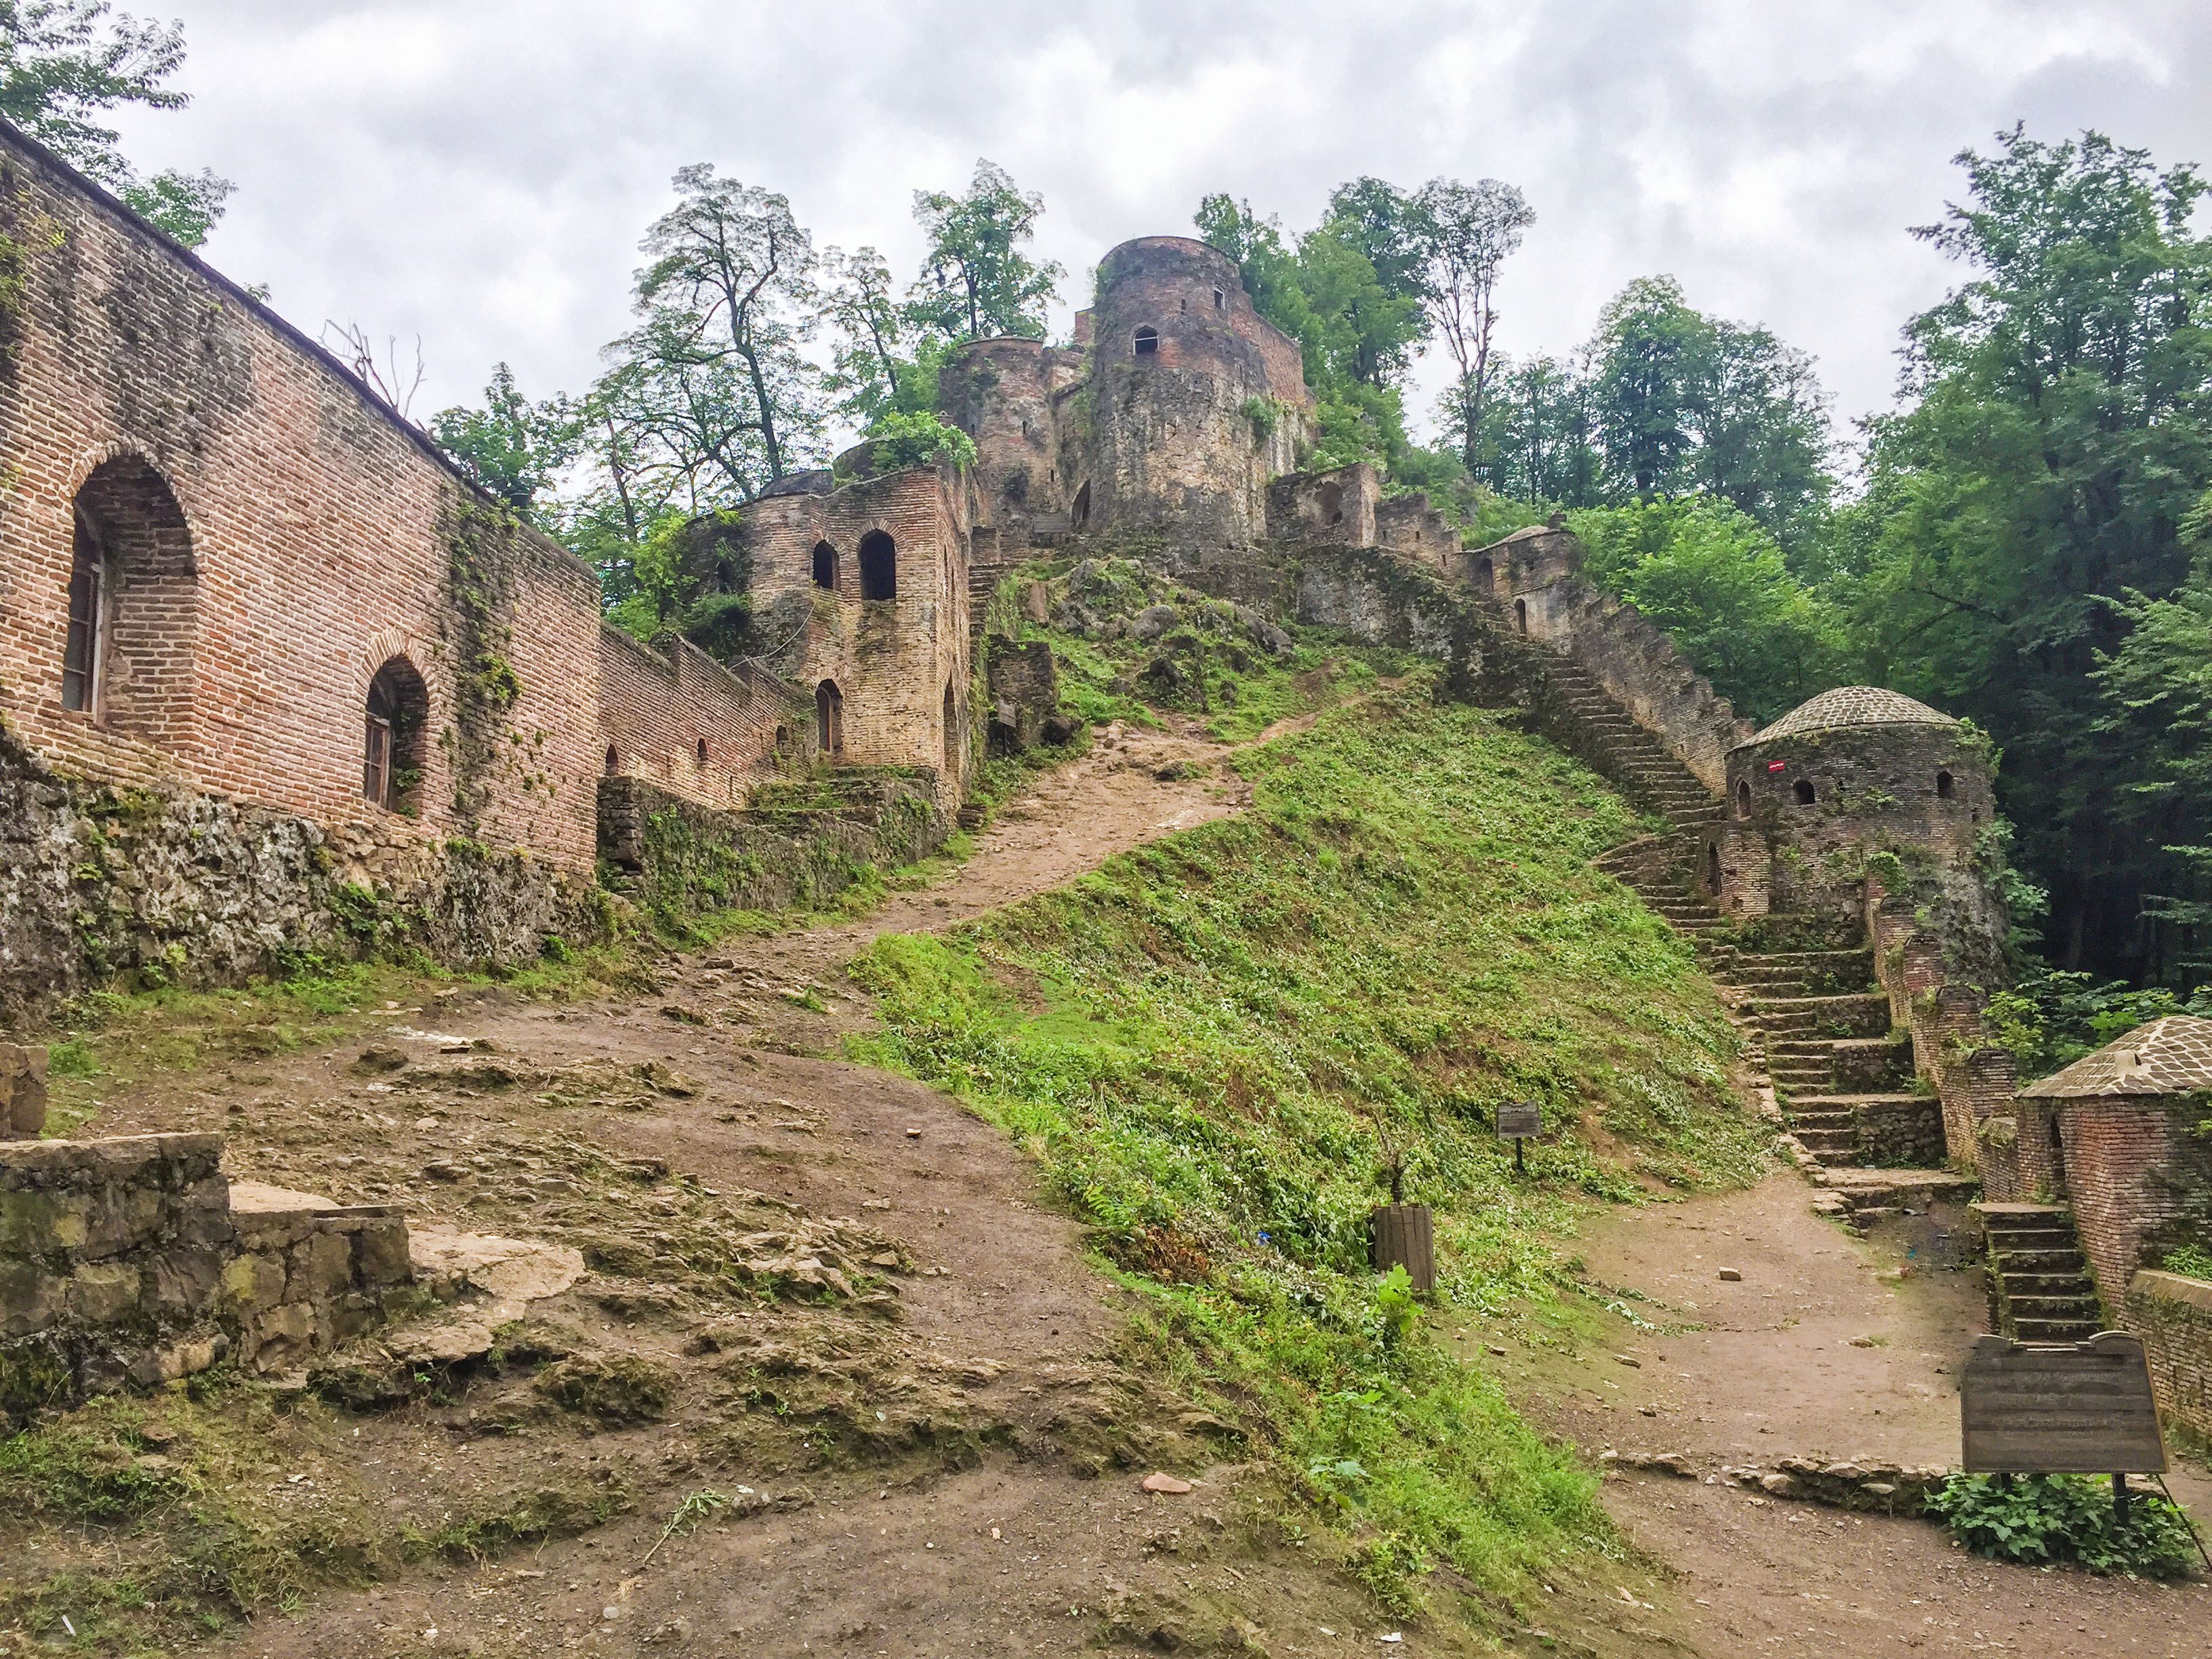 Rudkhan Castle; also Roodkhan Castle, is a brick and stone medieval fortress in Iran that was built by the Talyshs to defend against the Arab invaders during the Arab/Islamic invasion of Sassanian Iran